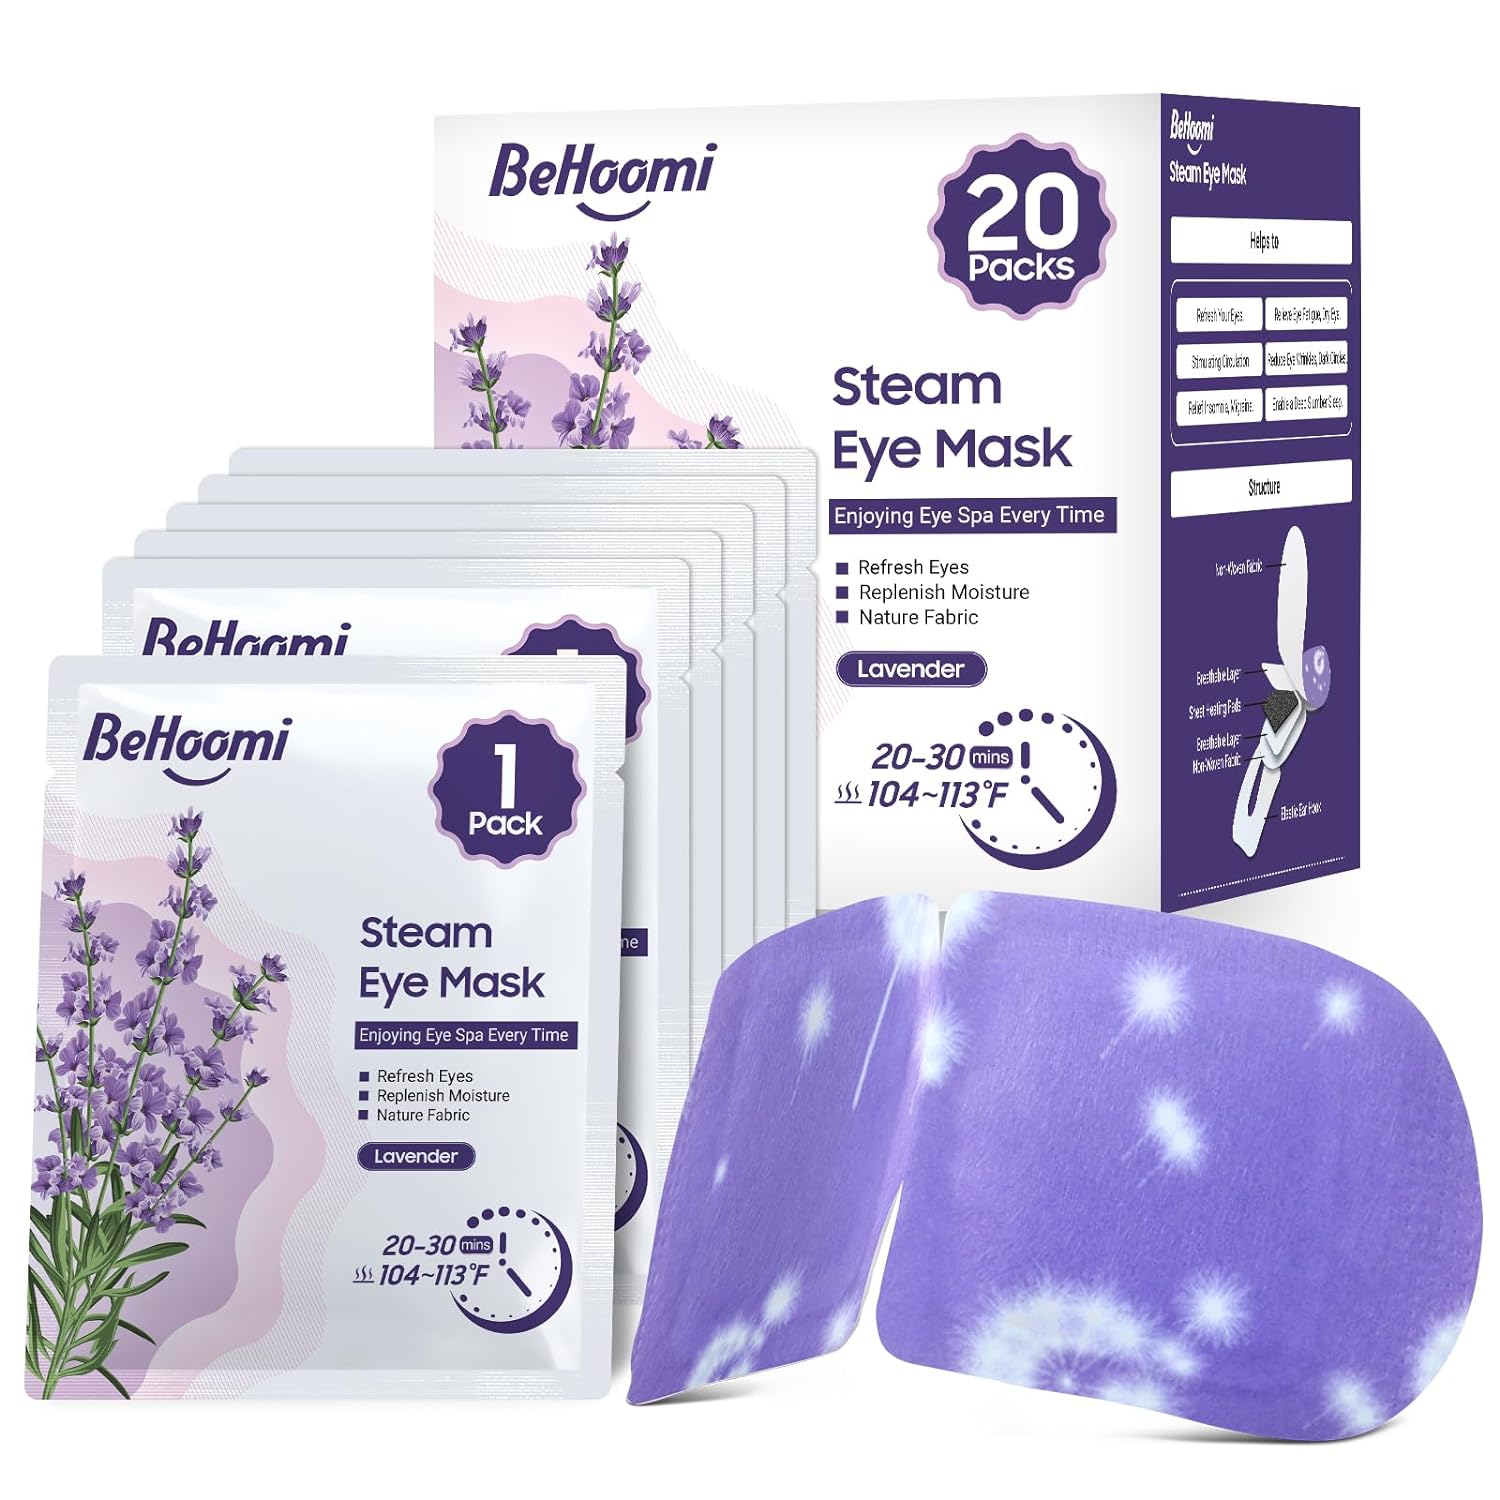 These are amazing. I wear them when I cant sleep and they do wonders. I fall asleep quickly and remove them when I turn and realize they are still on. The warmth, weight and lavender smell are very soothing. Definitely recommend.